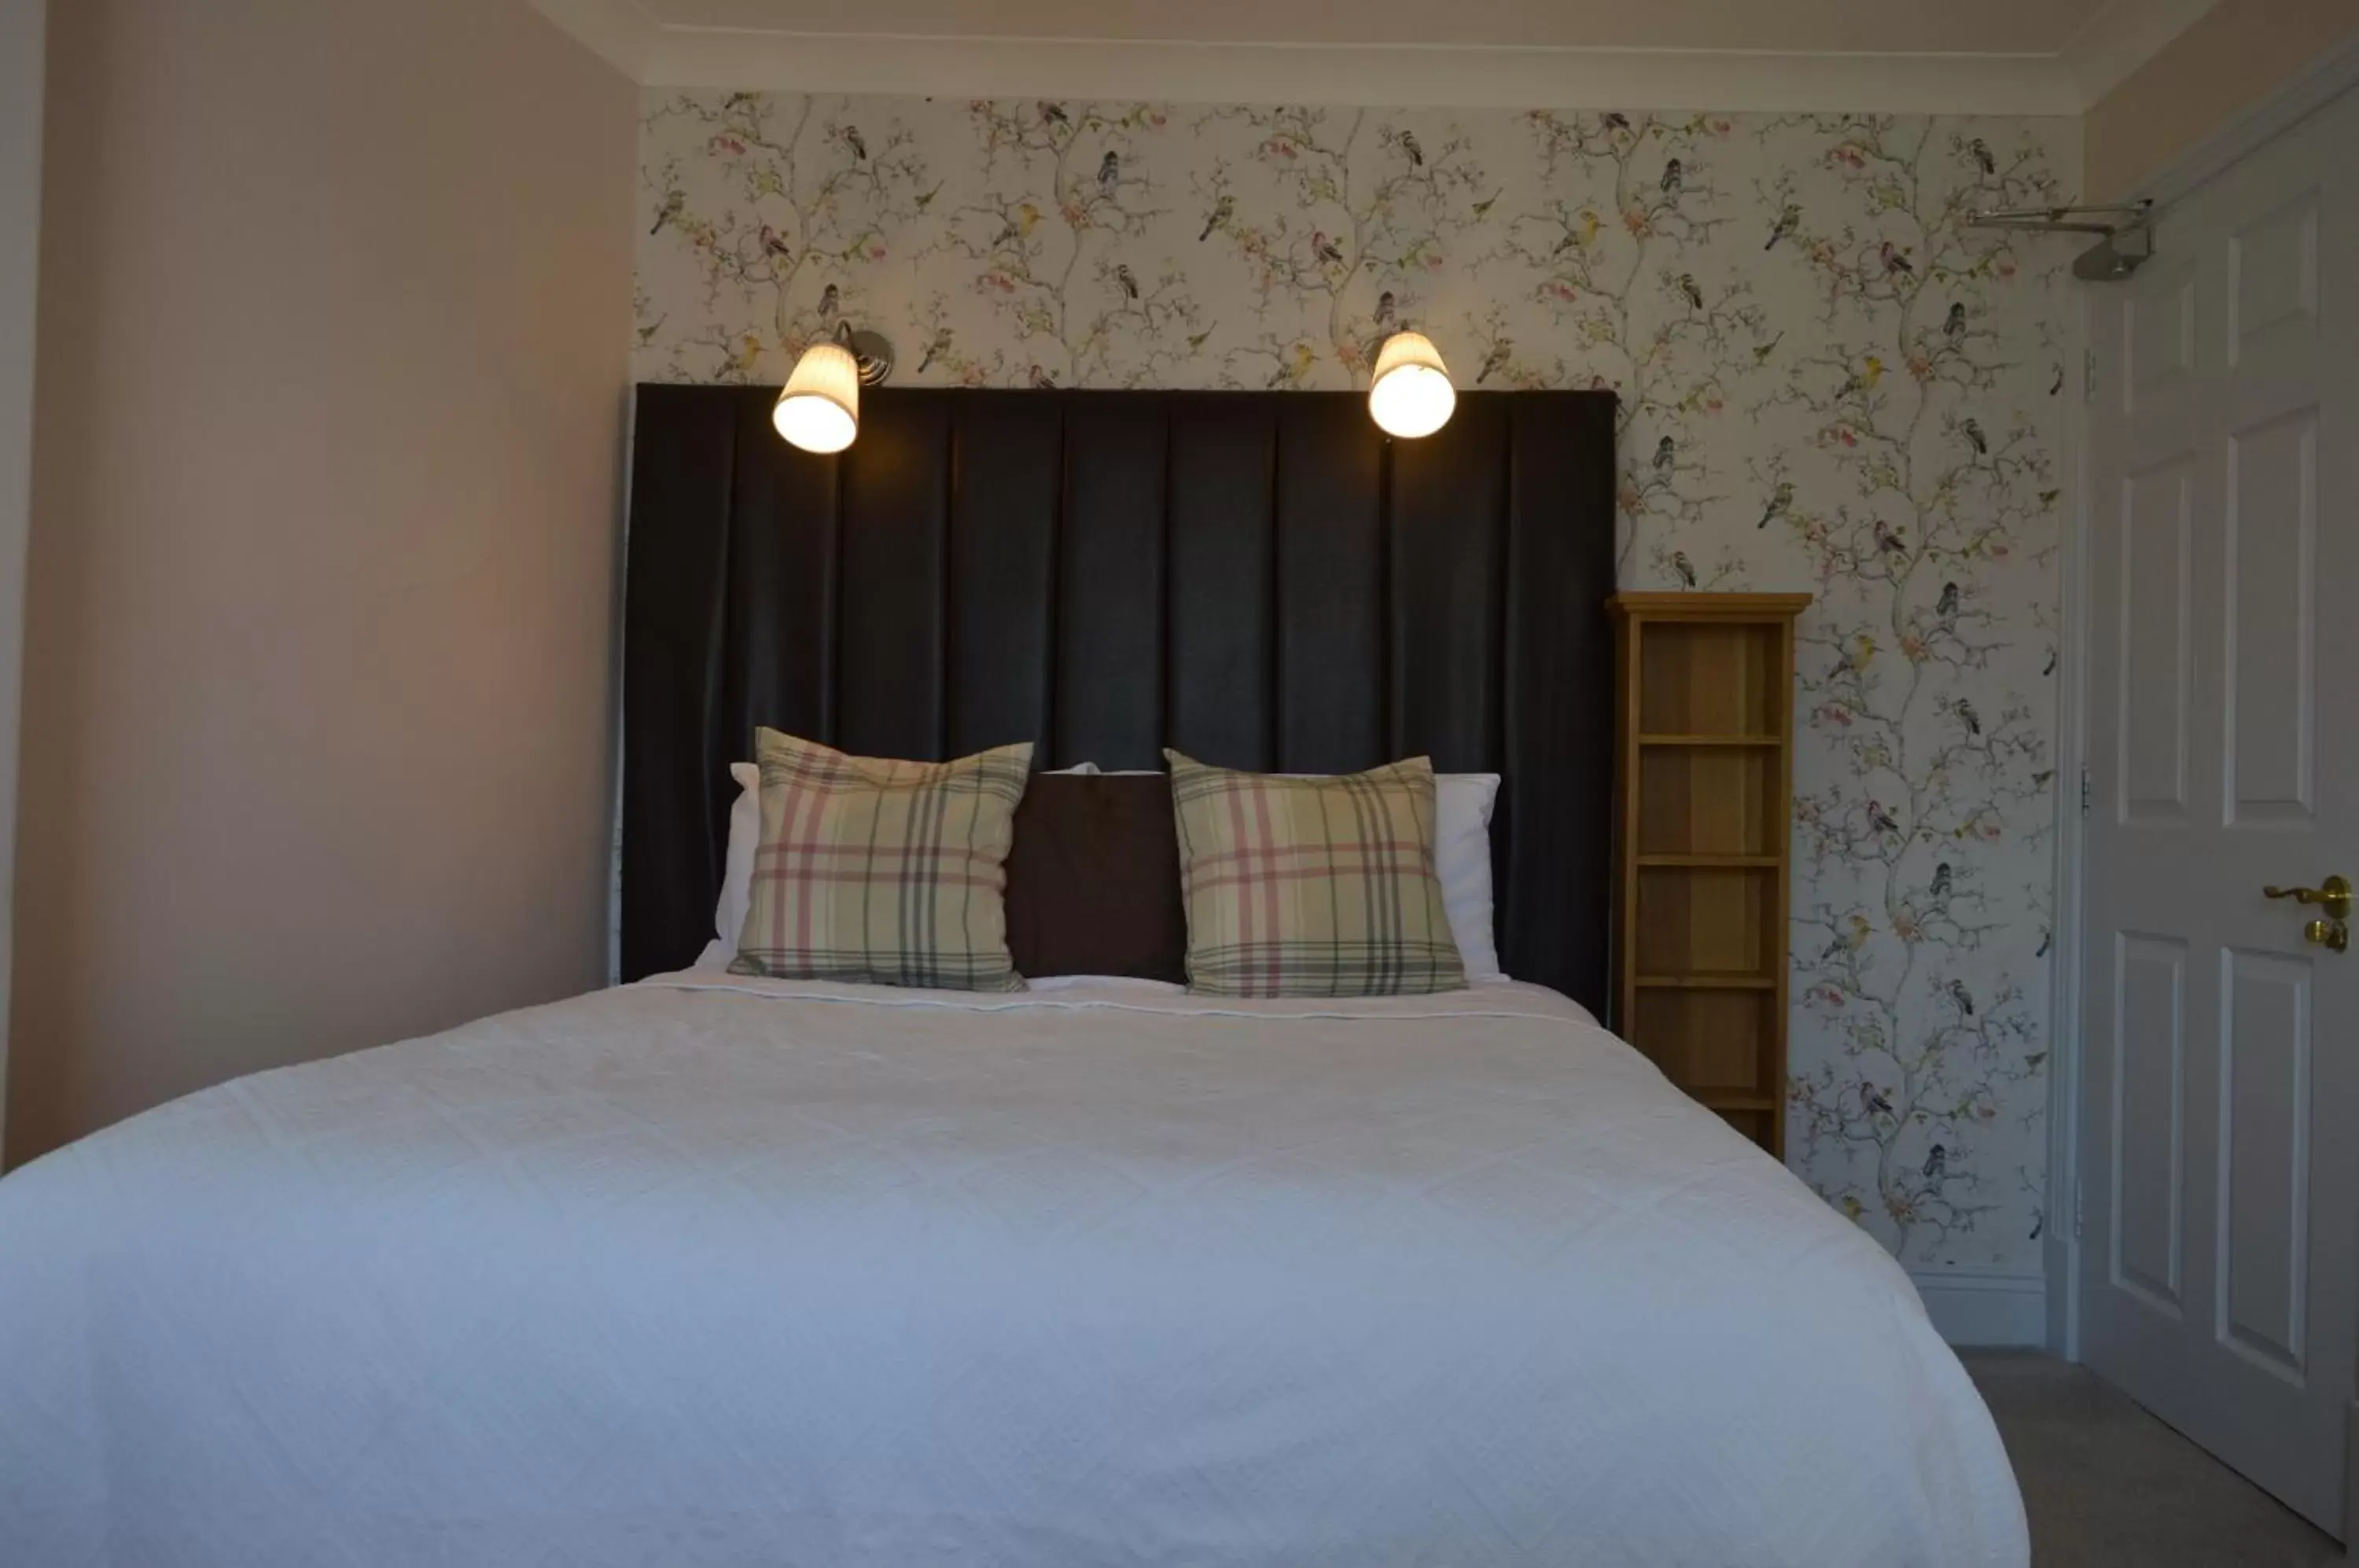 Bedroom in The Ilchester Arms Hotel, Ilchester Somerset